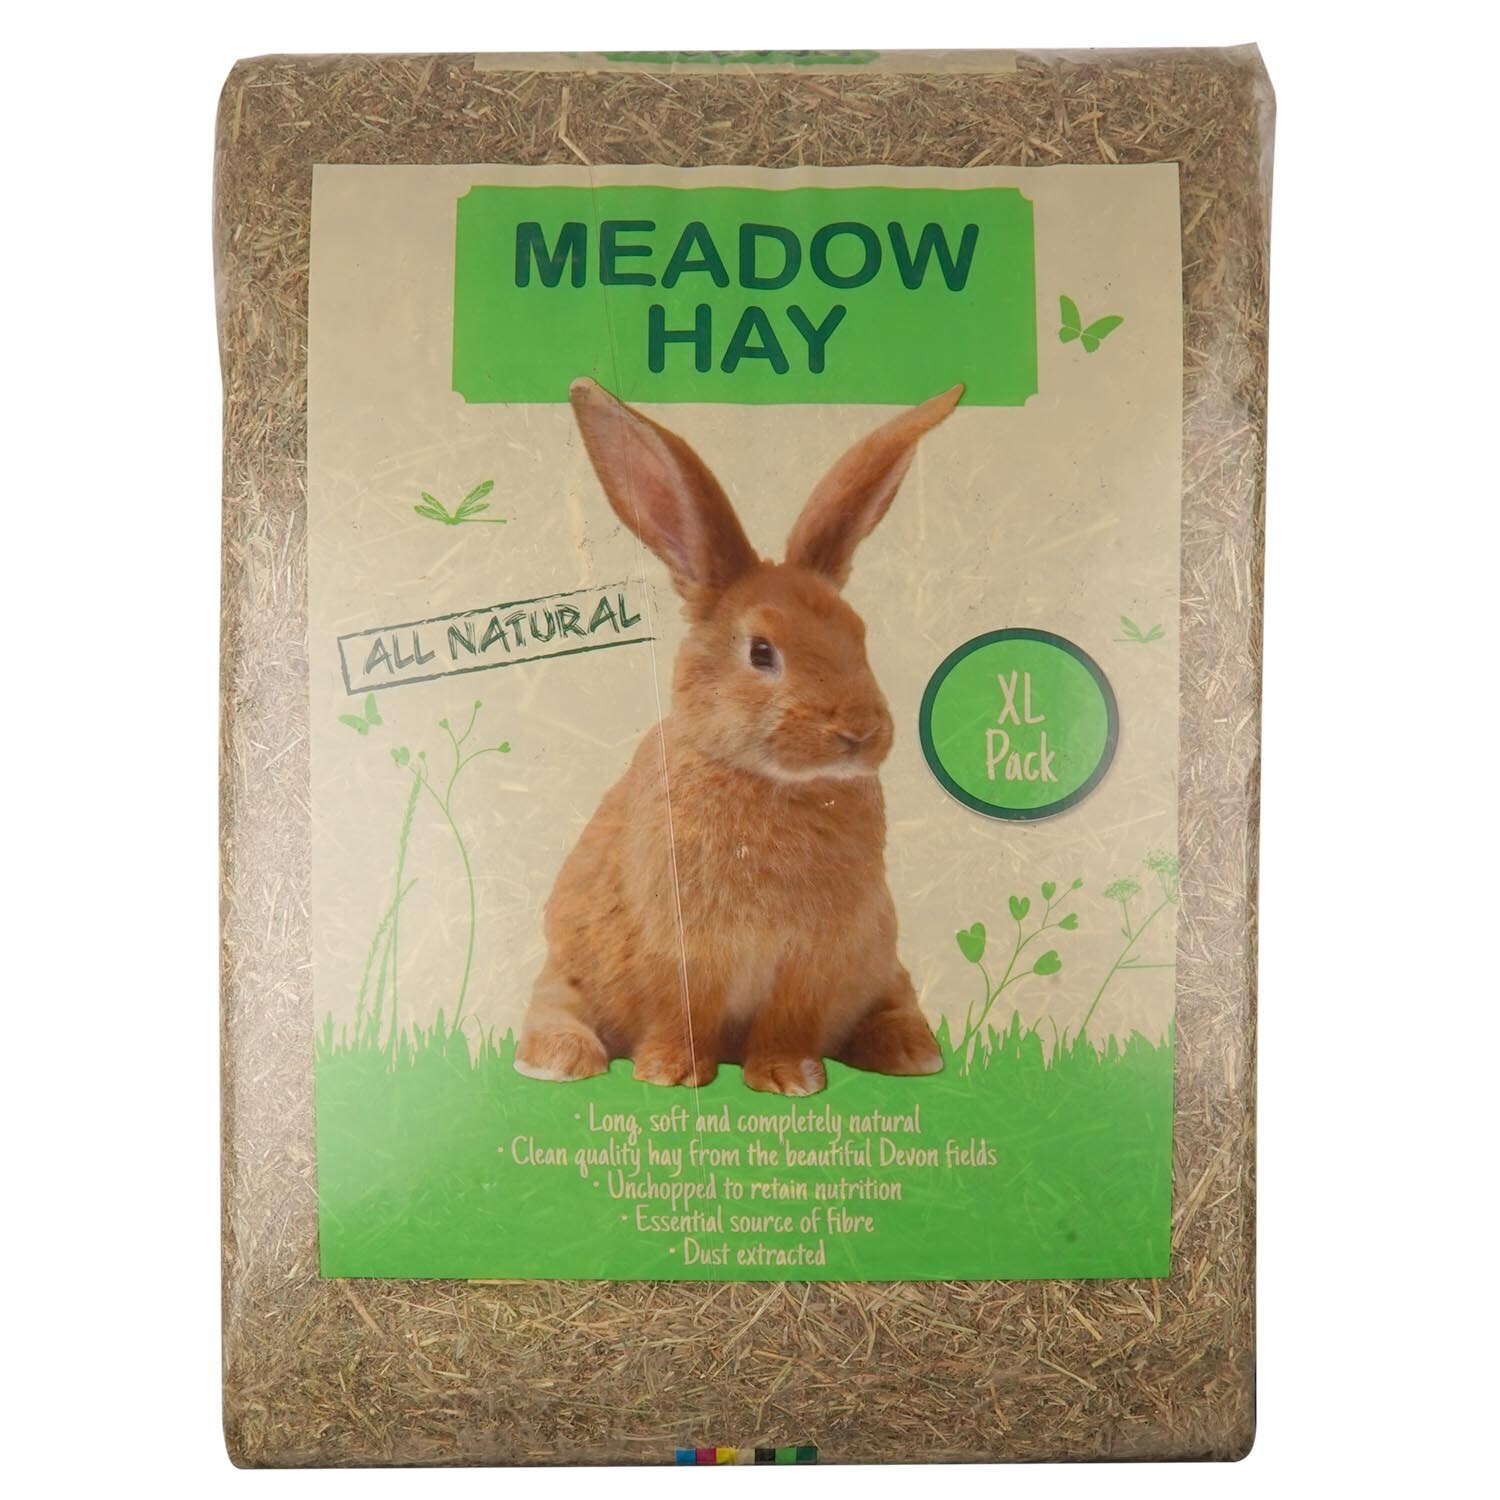 Nature's Own Meadow Hay XL Pack Image